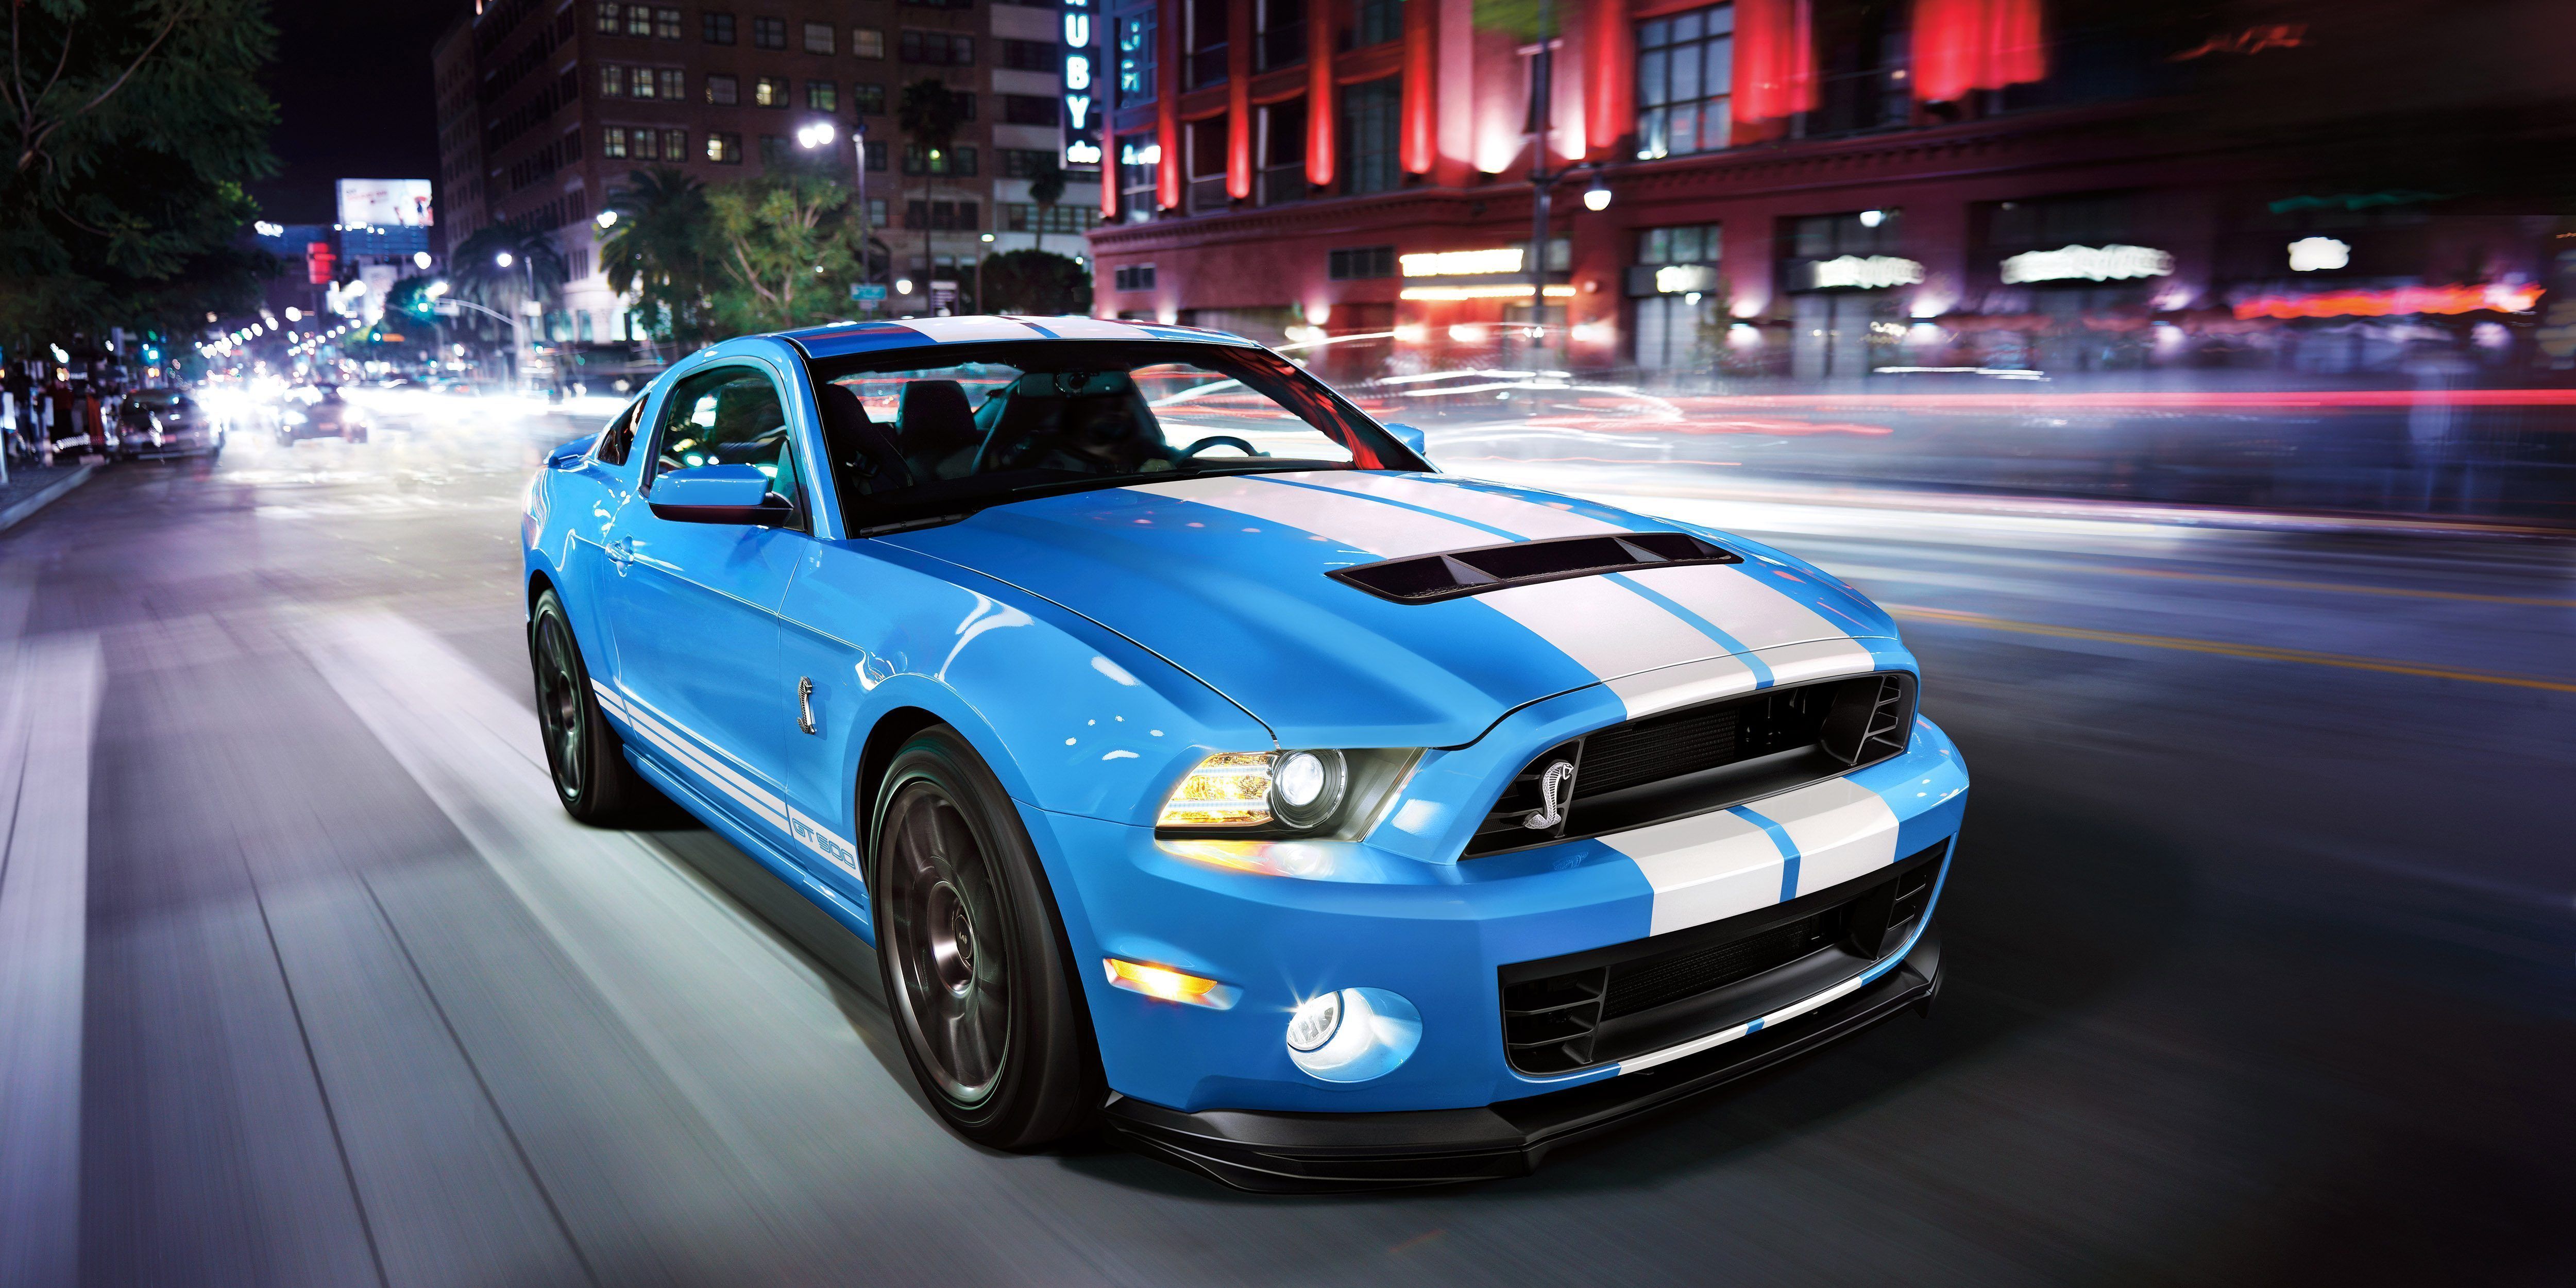 A blue Shelby GT500 on the street.